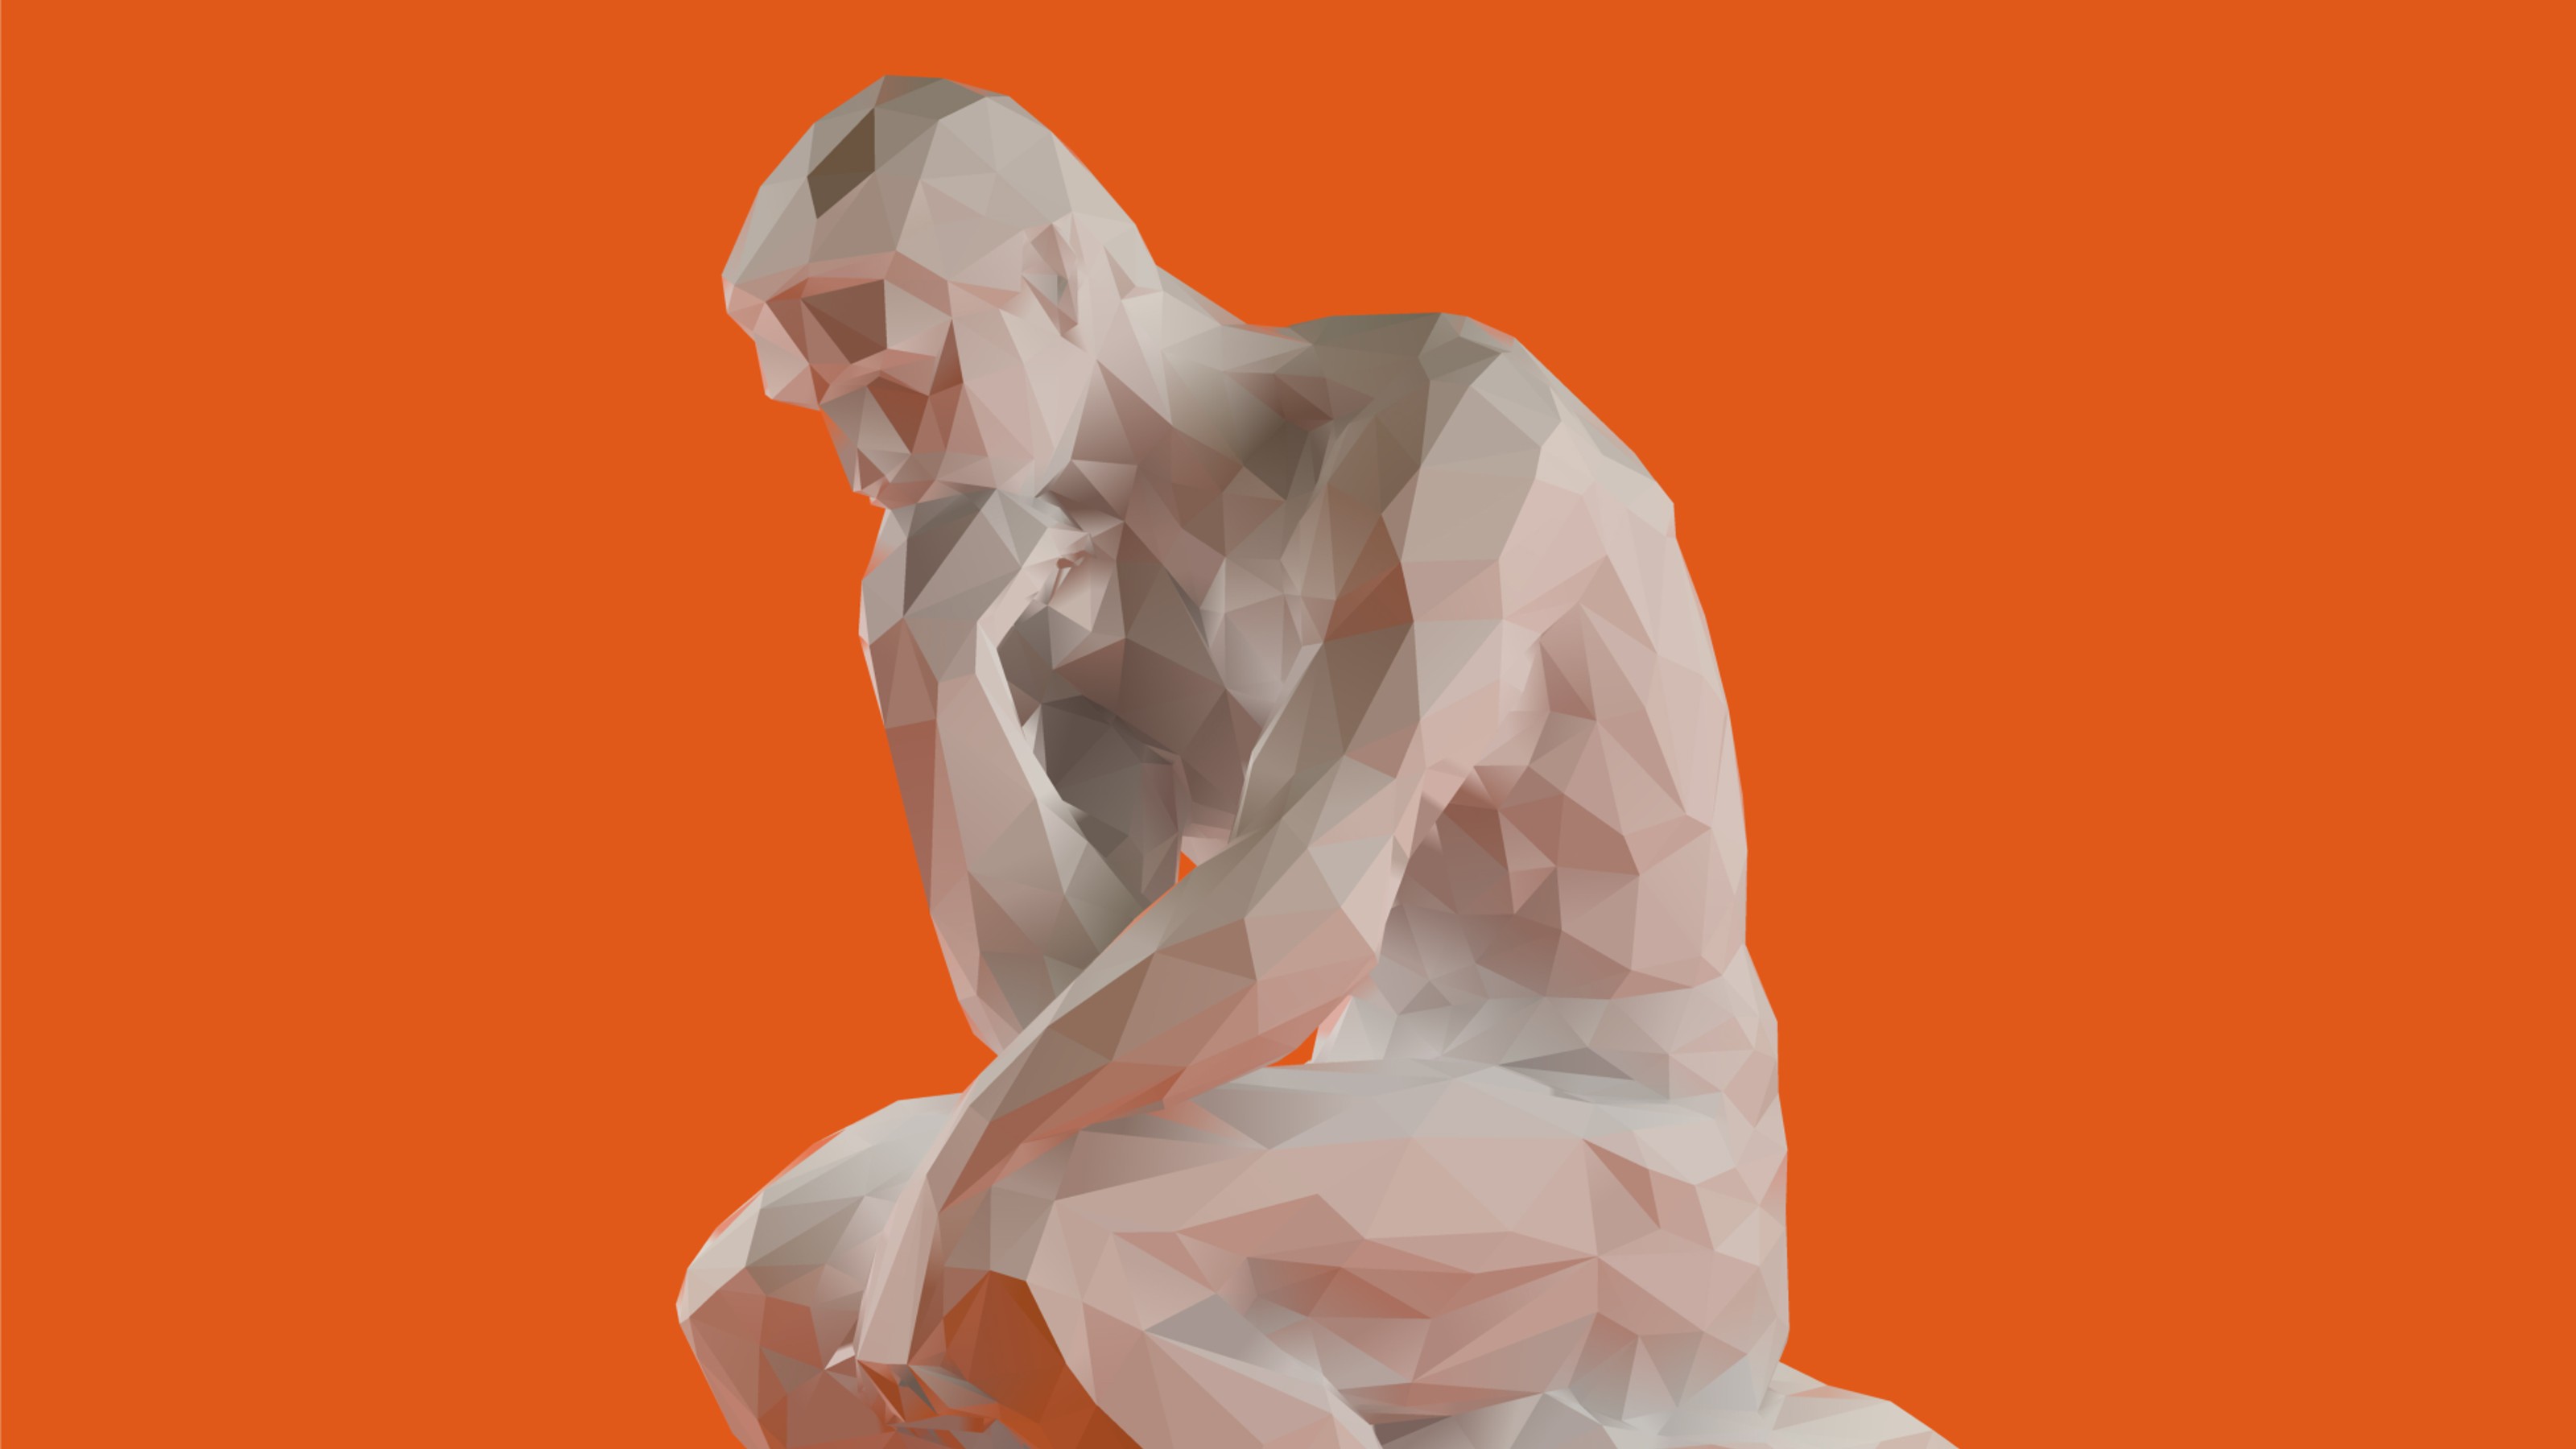 A low polygon model of the thinker